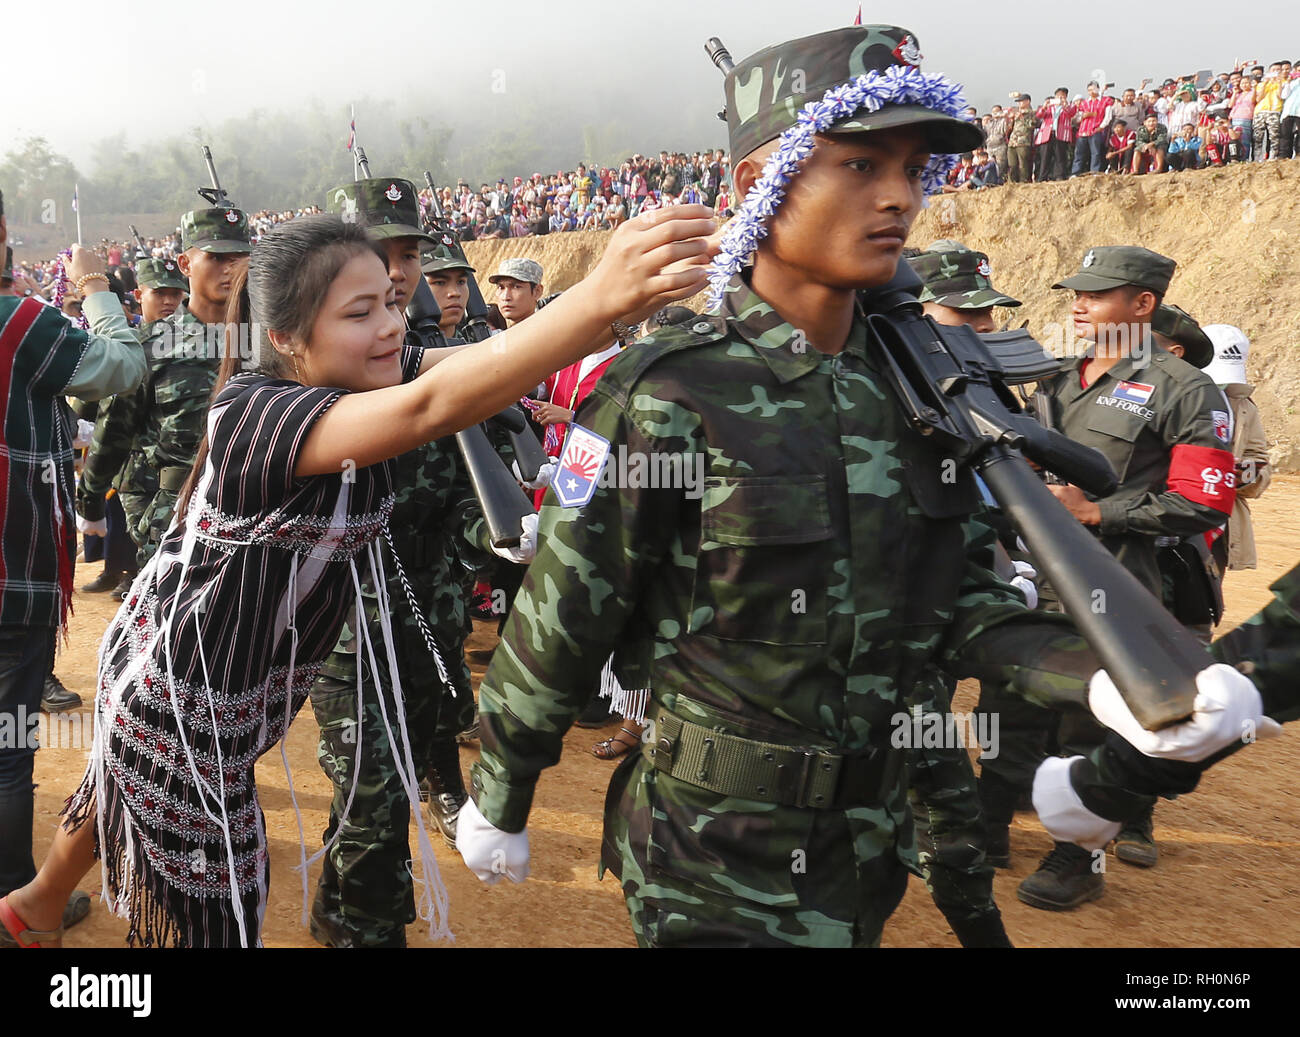 Thay Bay Hla, Myanmar. 31st Jan, 2019. Karen National Union (KNU) soldiers  receives a garland from people during a parade at a ceremony to mark the  70th anniversary of Karen Revolution Day